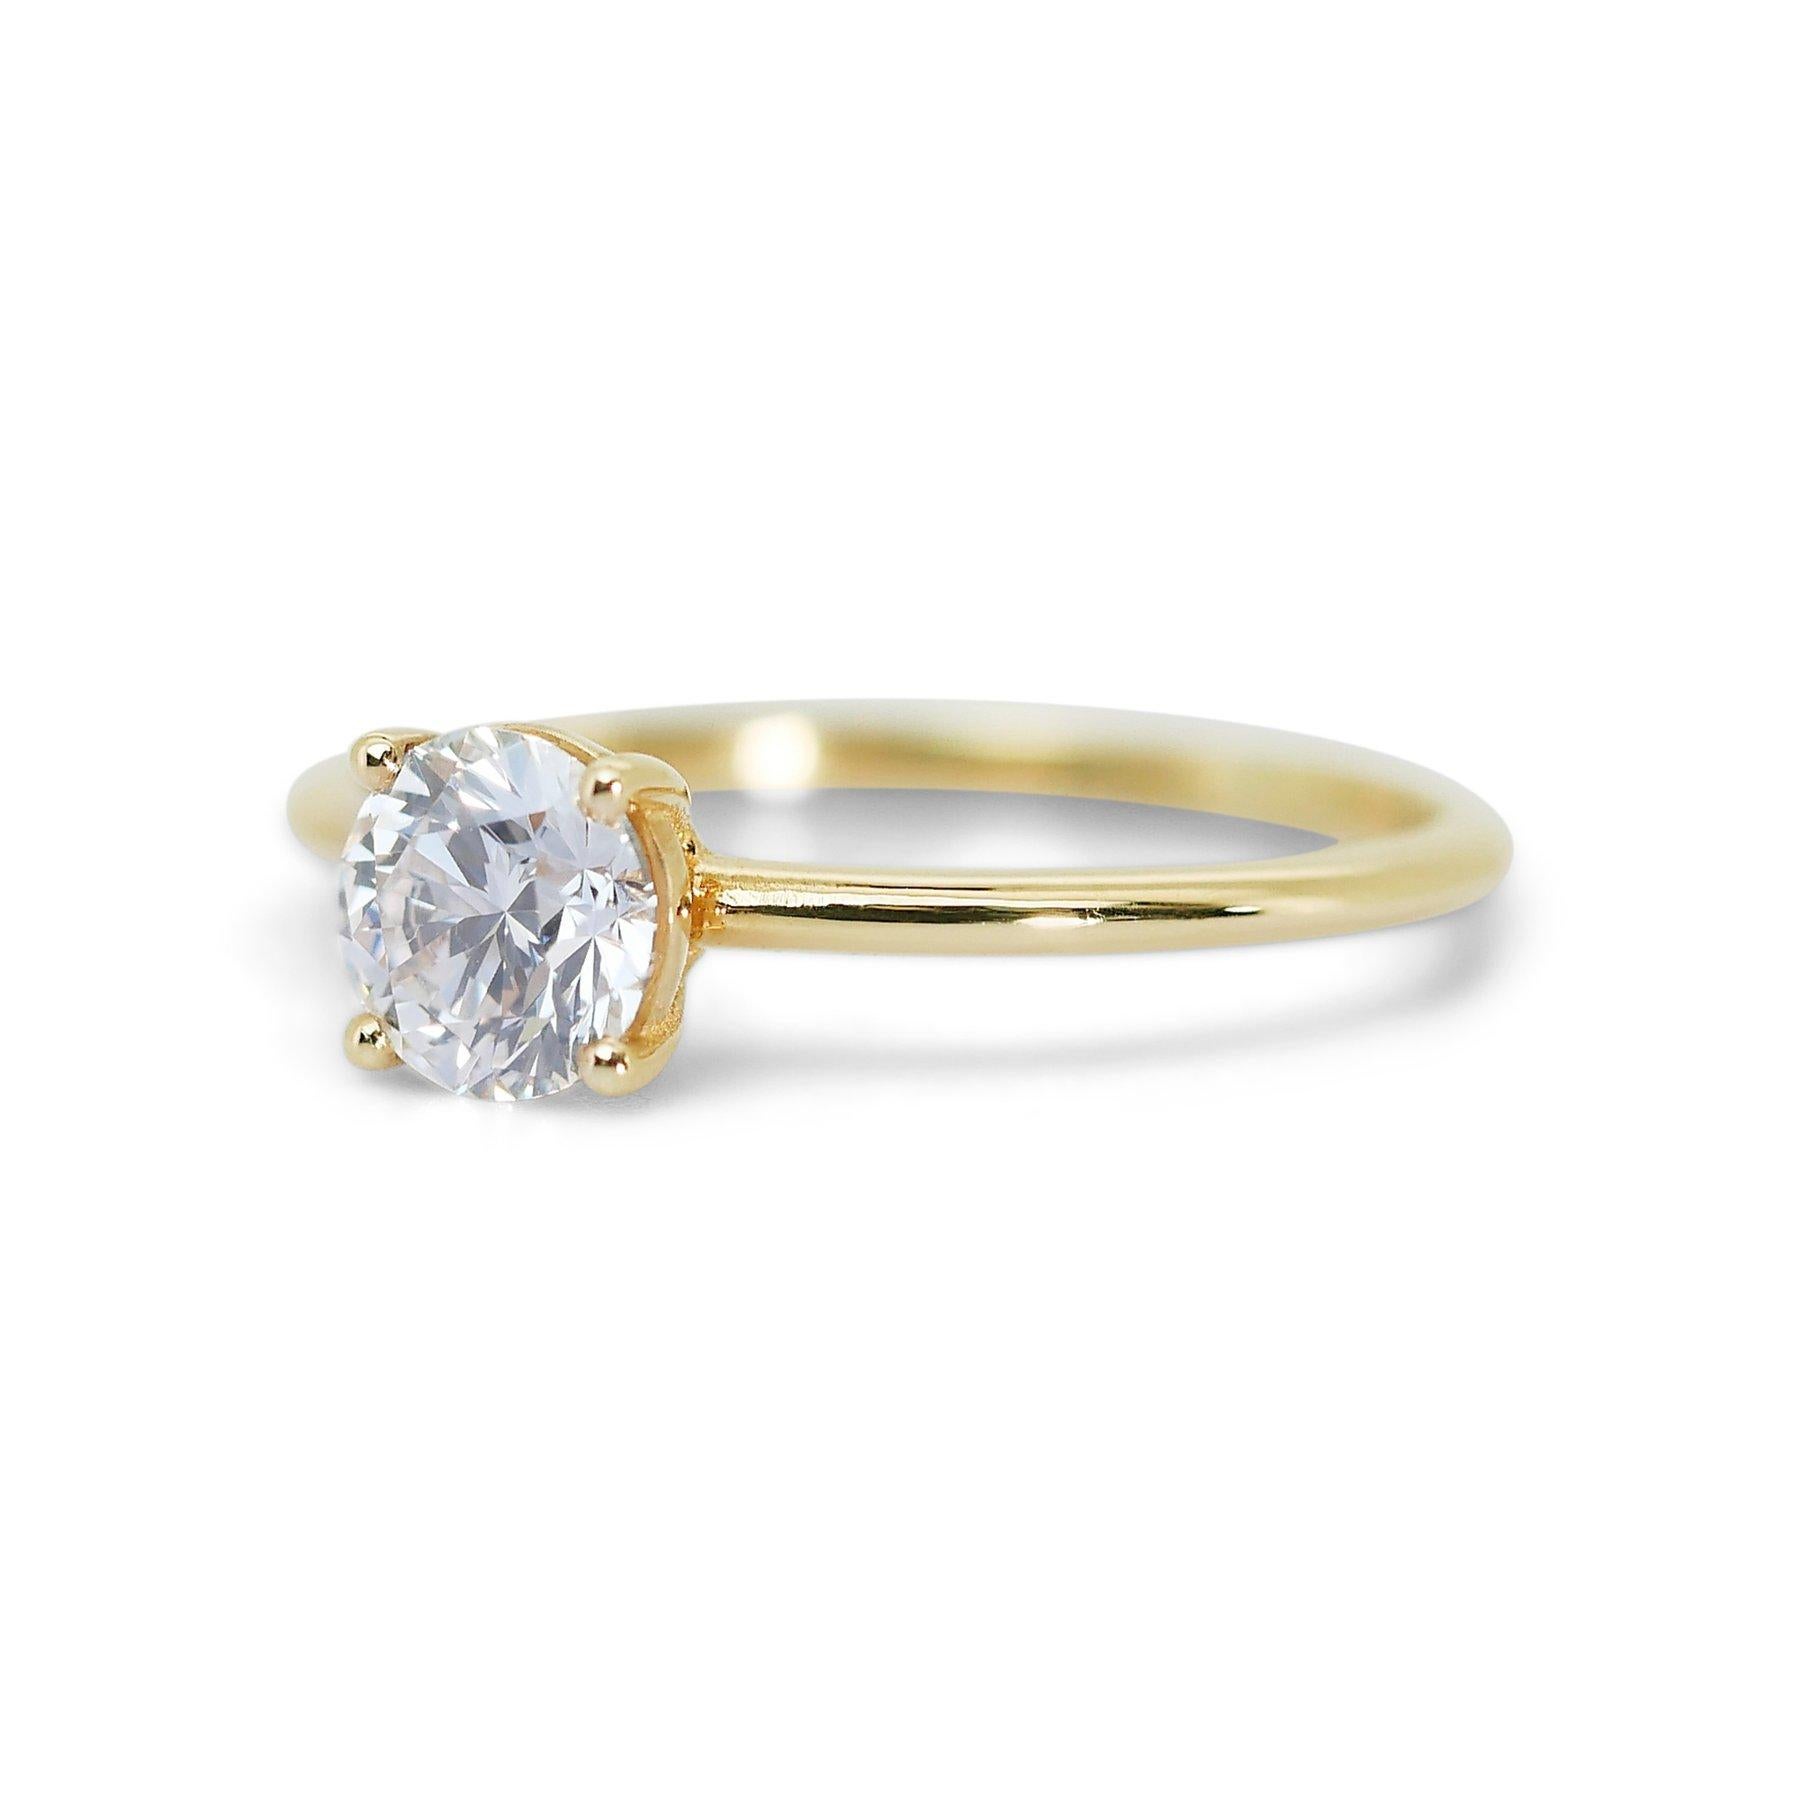 Brilliant Cut Majestic 18K Yellow Gold Solitaire Diamond Ring with 1.03ct - GIA Certified